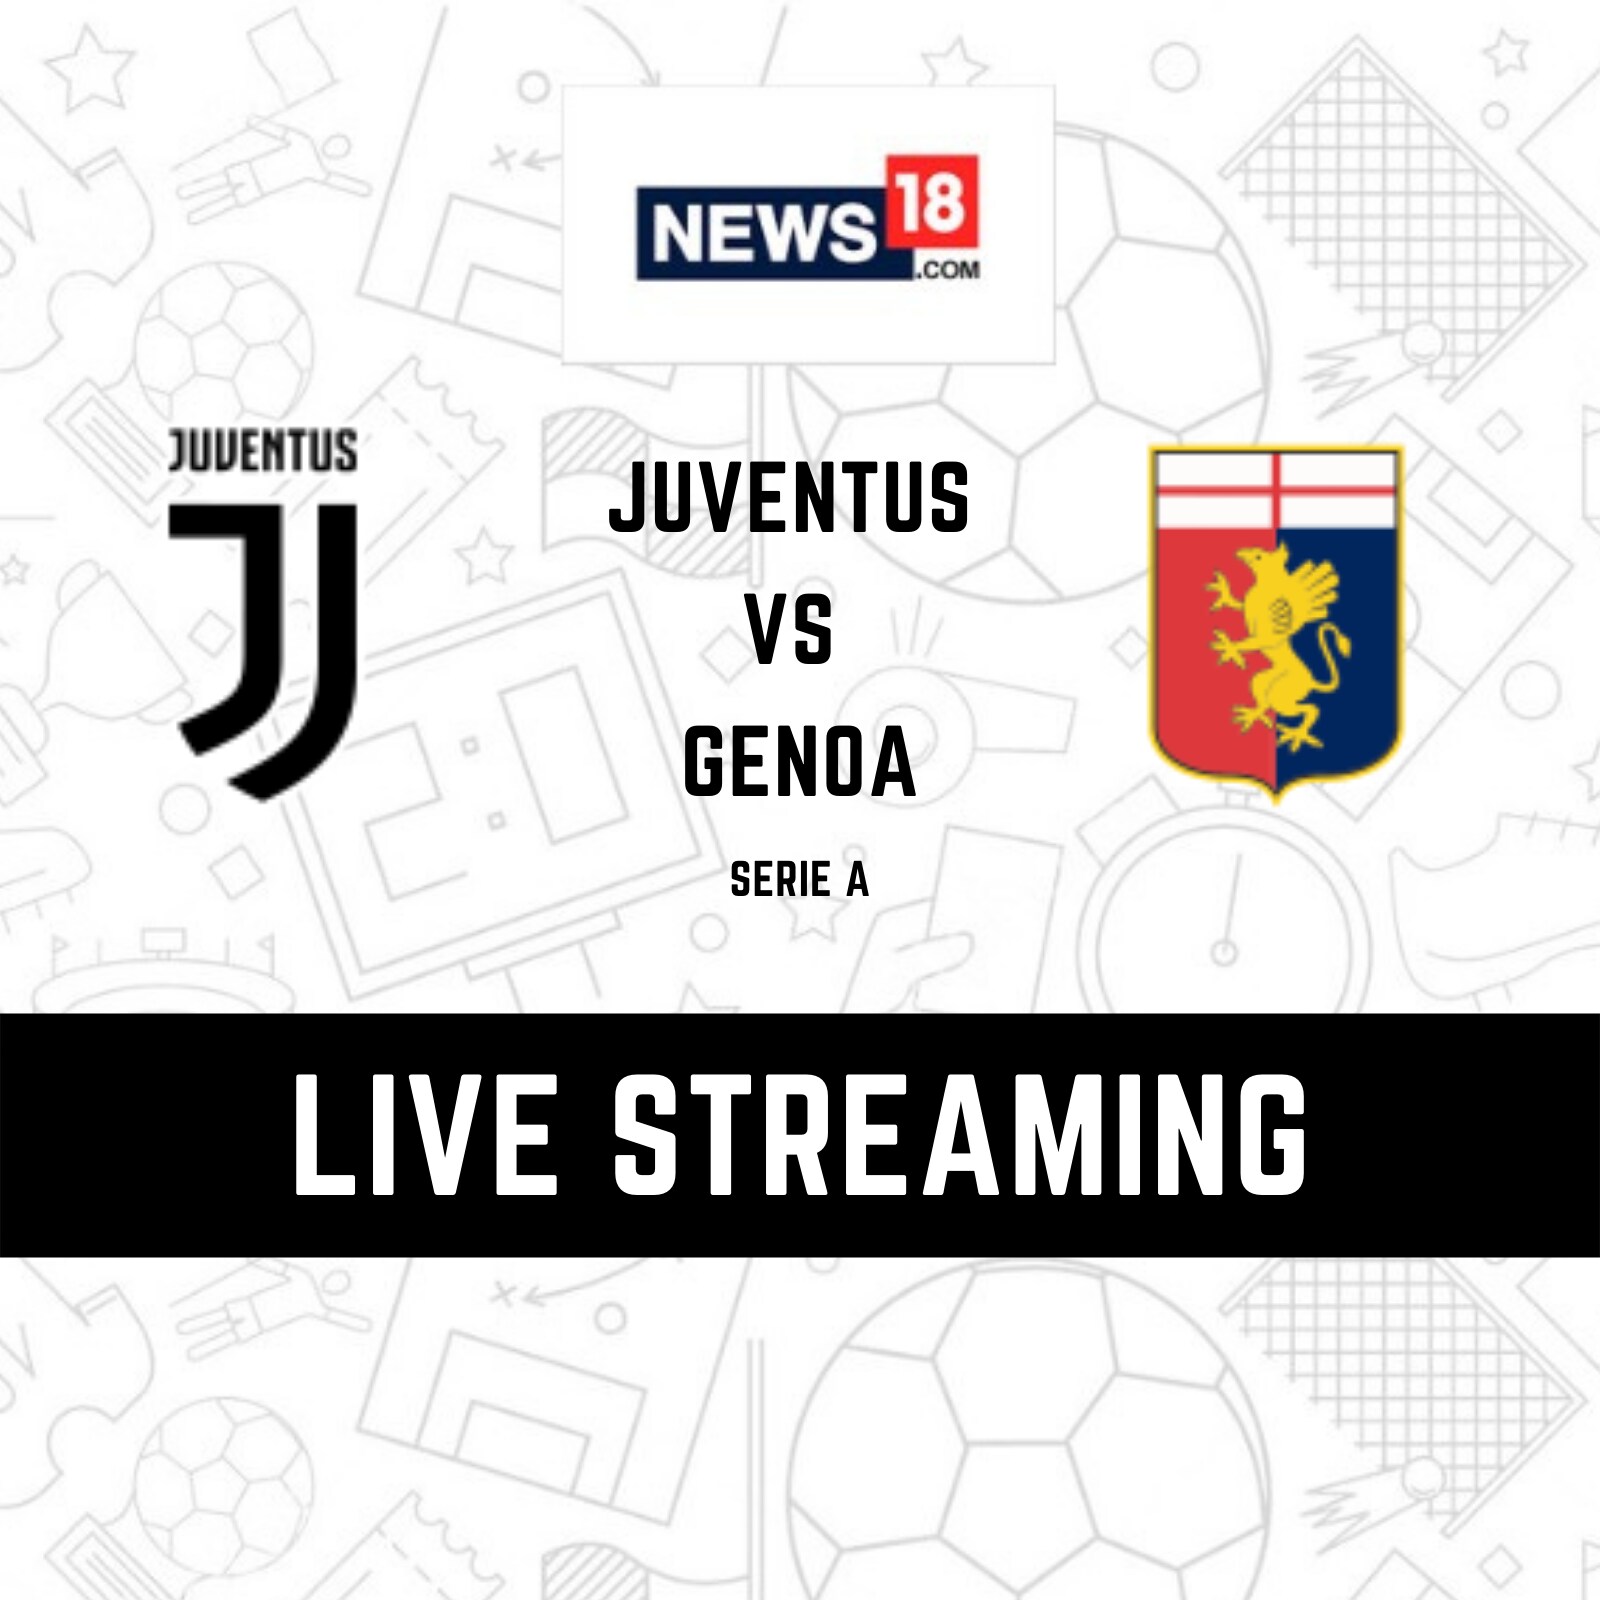 Serie A 2021-22 Juventus vs Genoa LIVE Streaming When and Where to Watch Online, TV Telecast, Team News